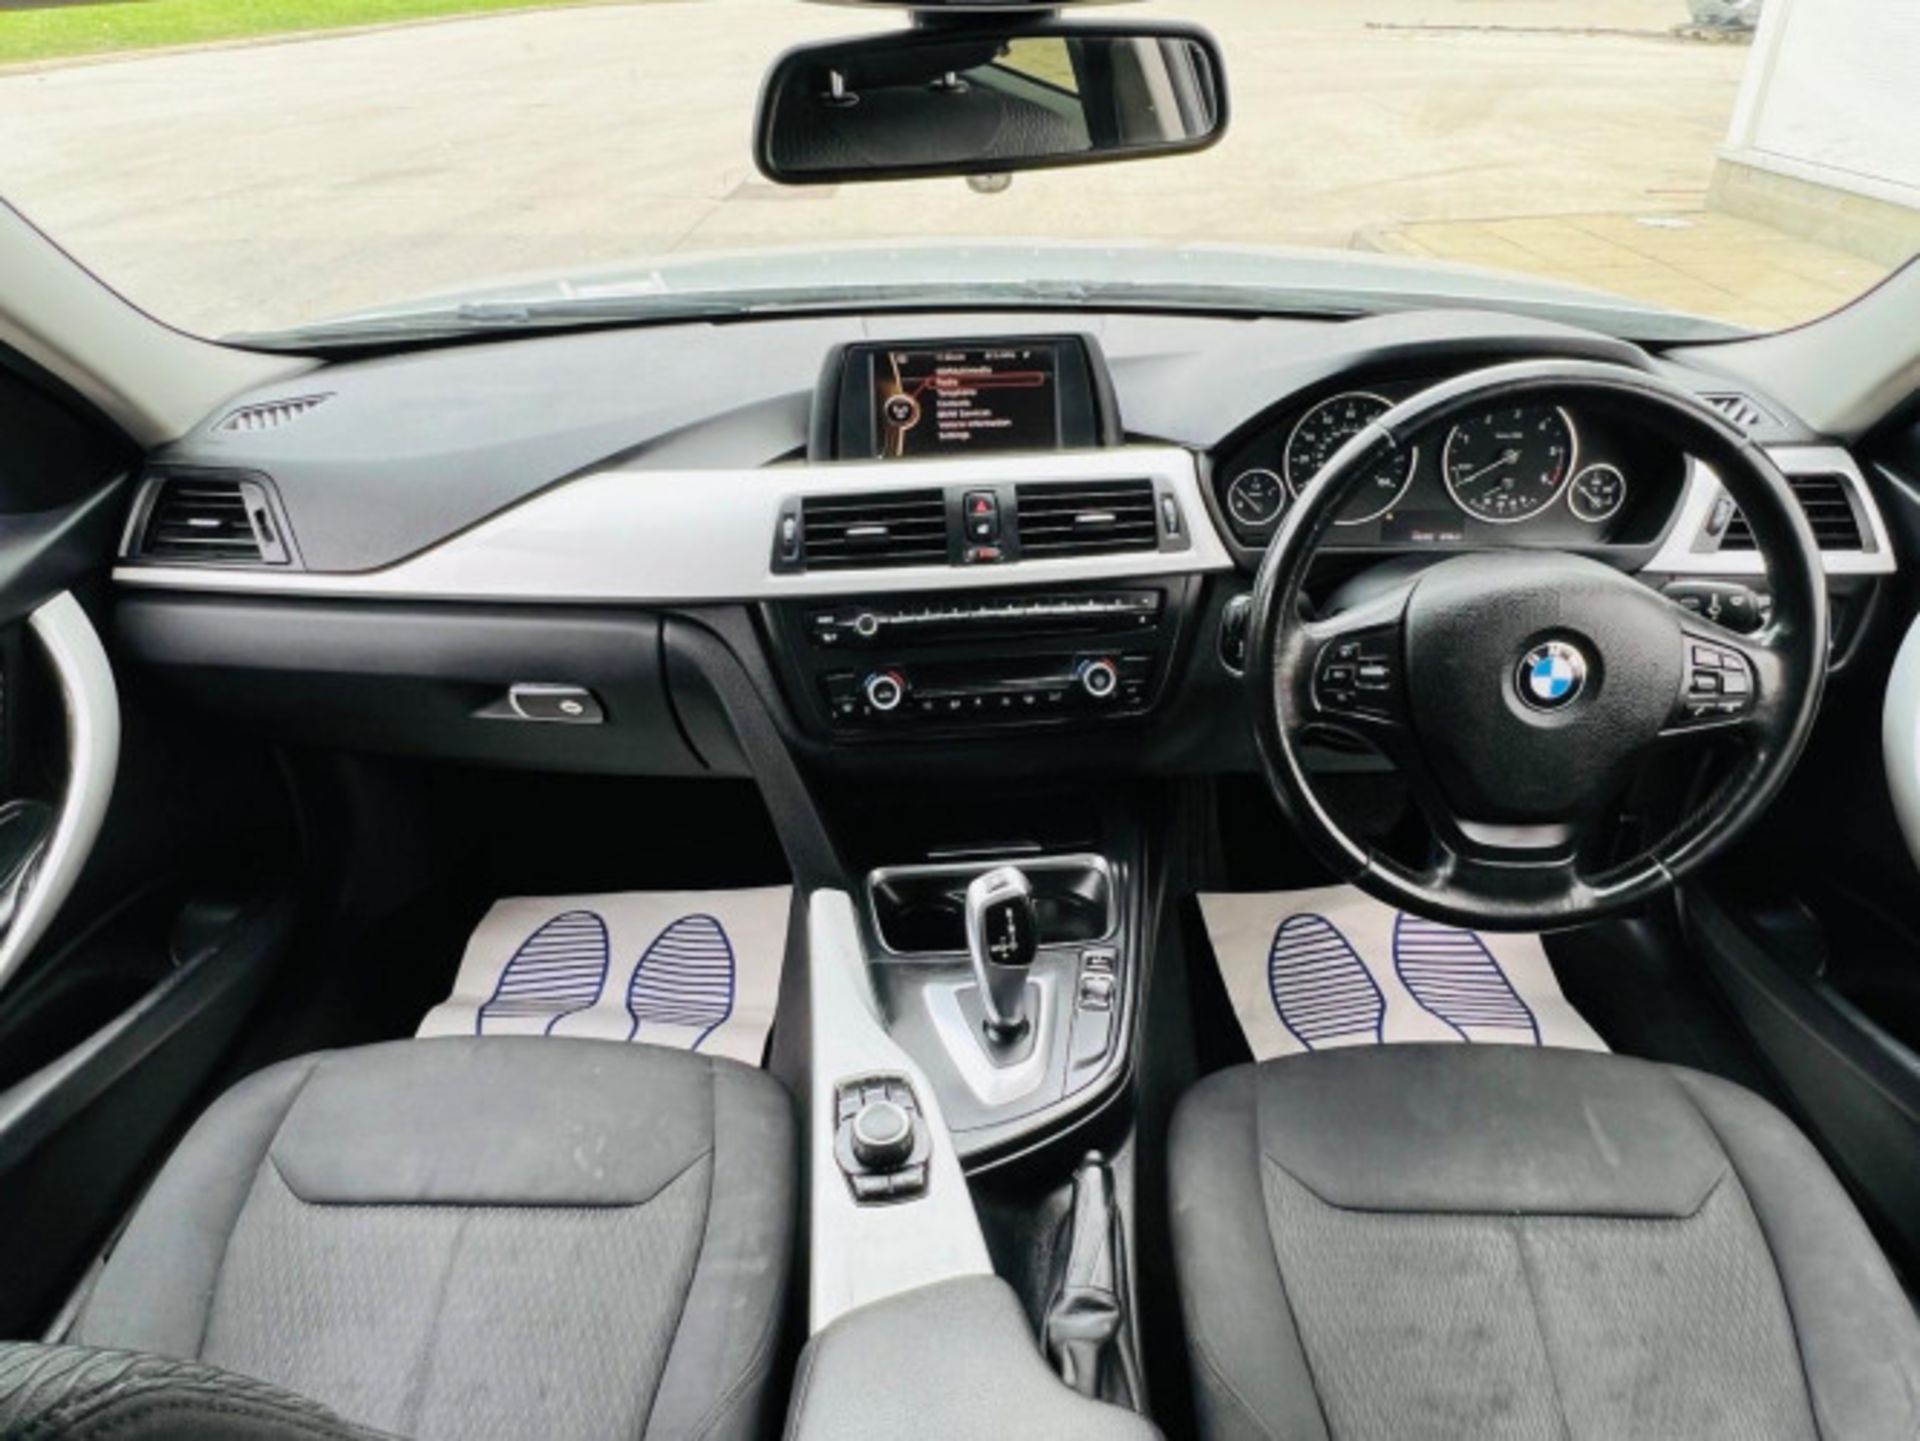 BMW 3 SERIES 2.0 DIESEL ED START STOP - A WELL-MAINTAINED GEM >>--NO VAT ON HAMMER--<< - Image 168 of 229